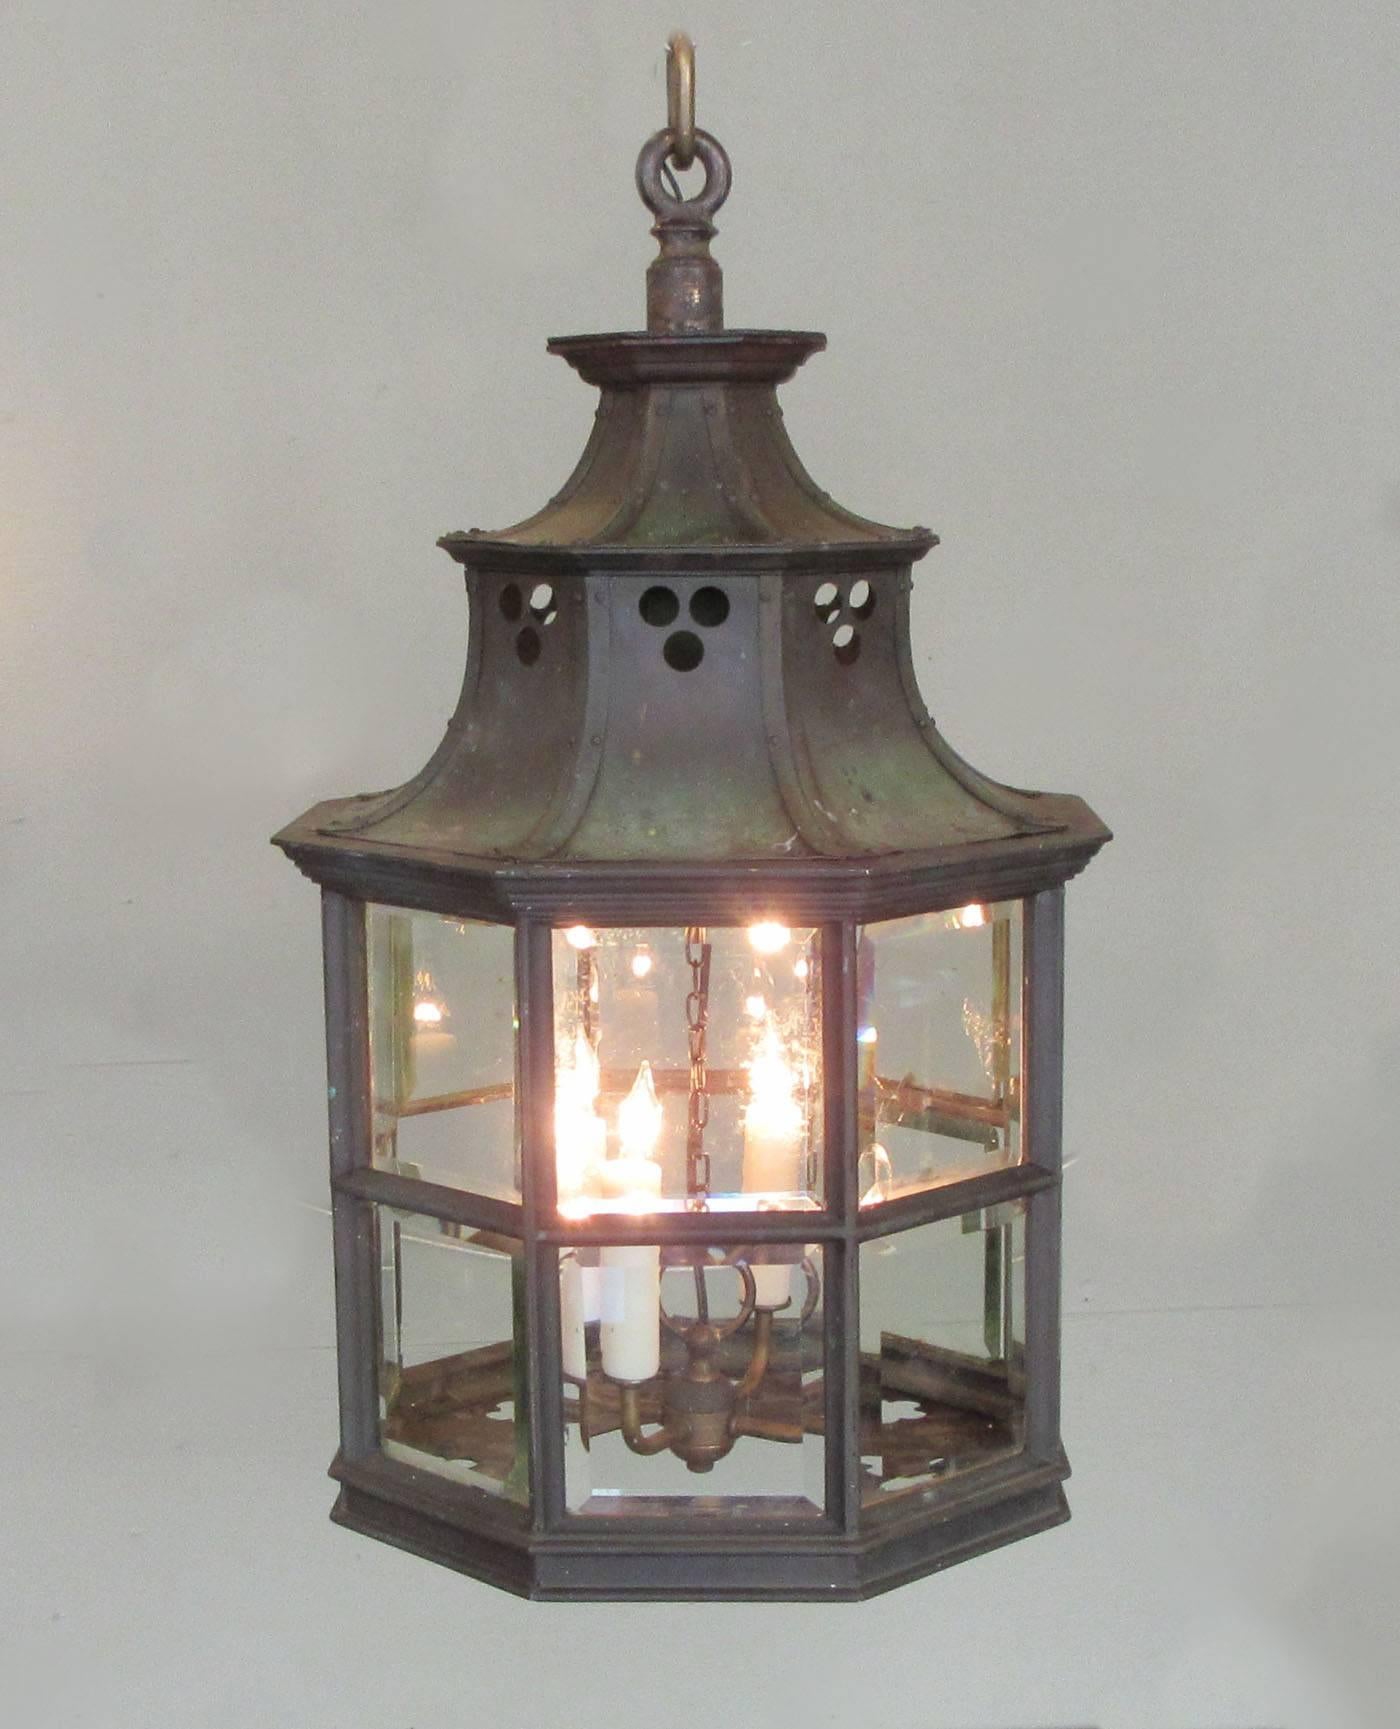 A sizable English Regency bronze and glass lantern, circa 1820, with original glass, trefoil stamped bottom and newly wired with four candle light pendant.